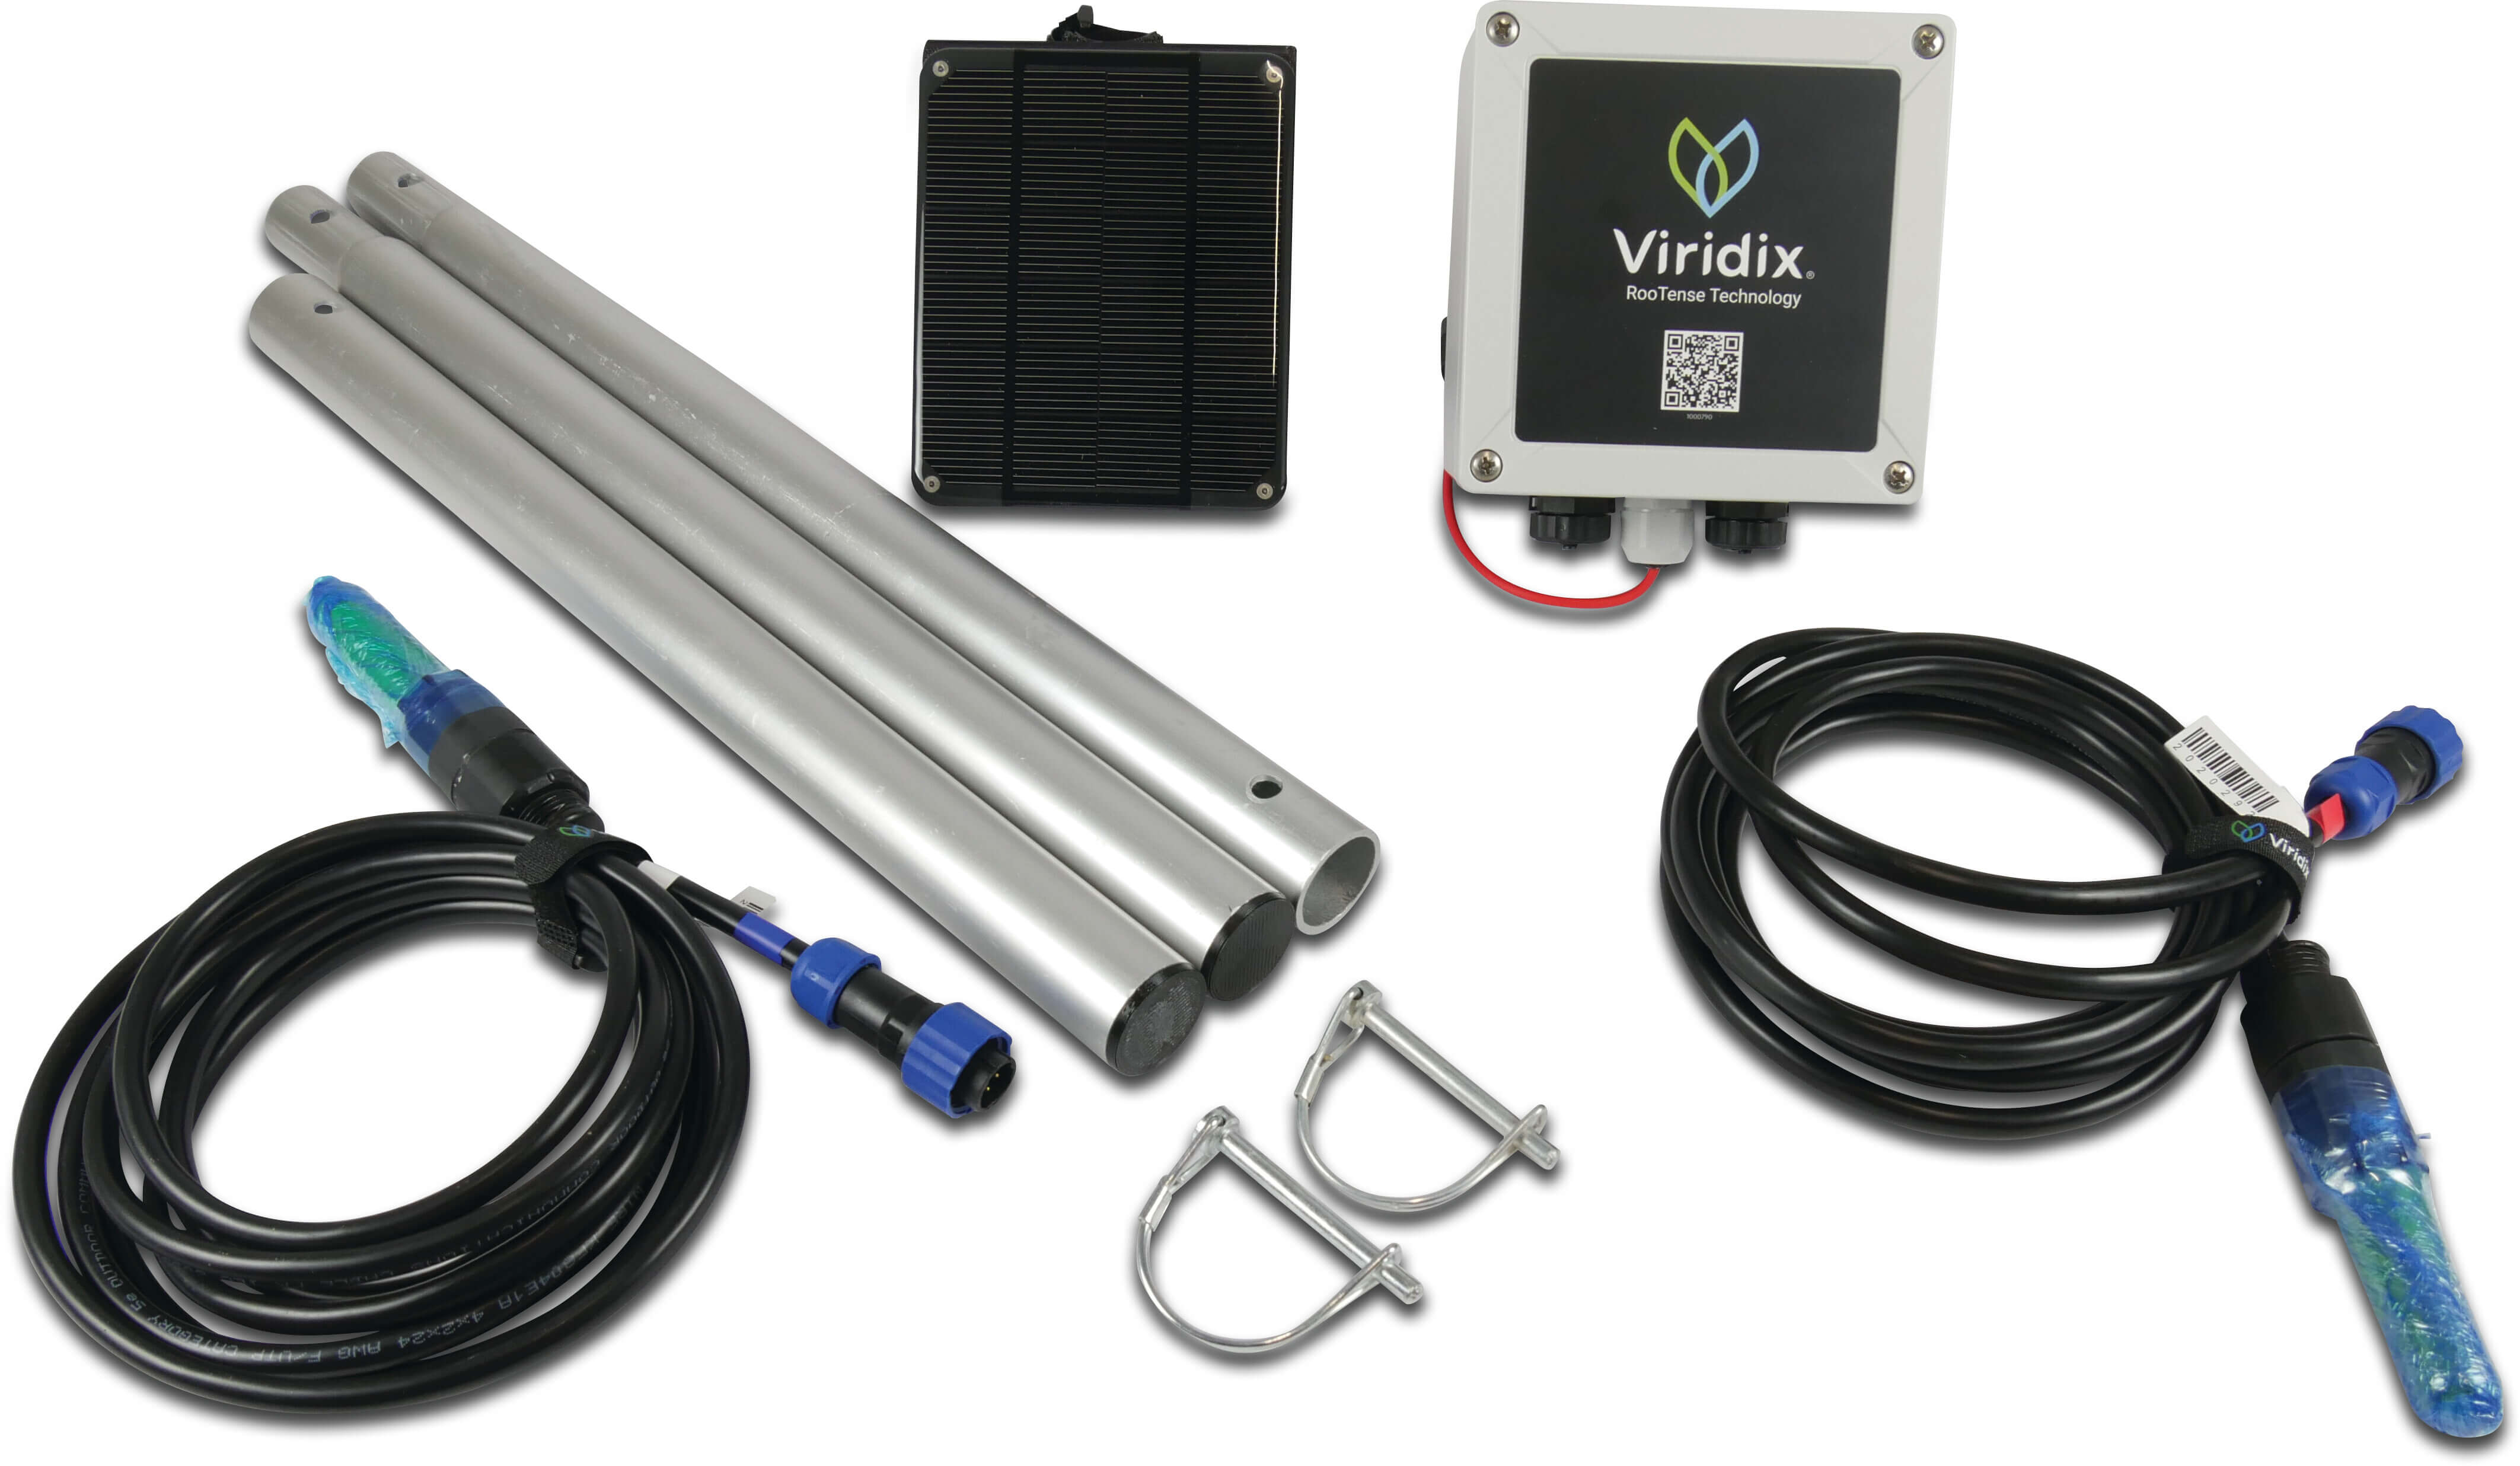 Viridix Gen2 system includes Iot device, 2 RooTense sensors, installation kit and 1 year subscription type Rootense 2 sensors